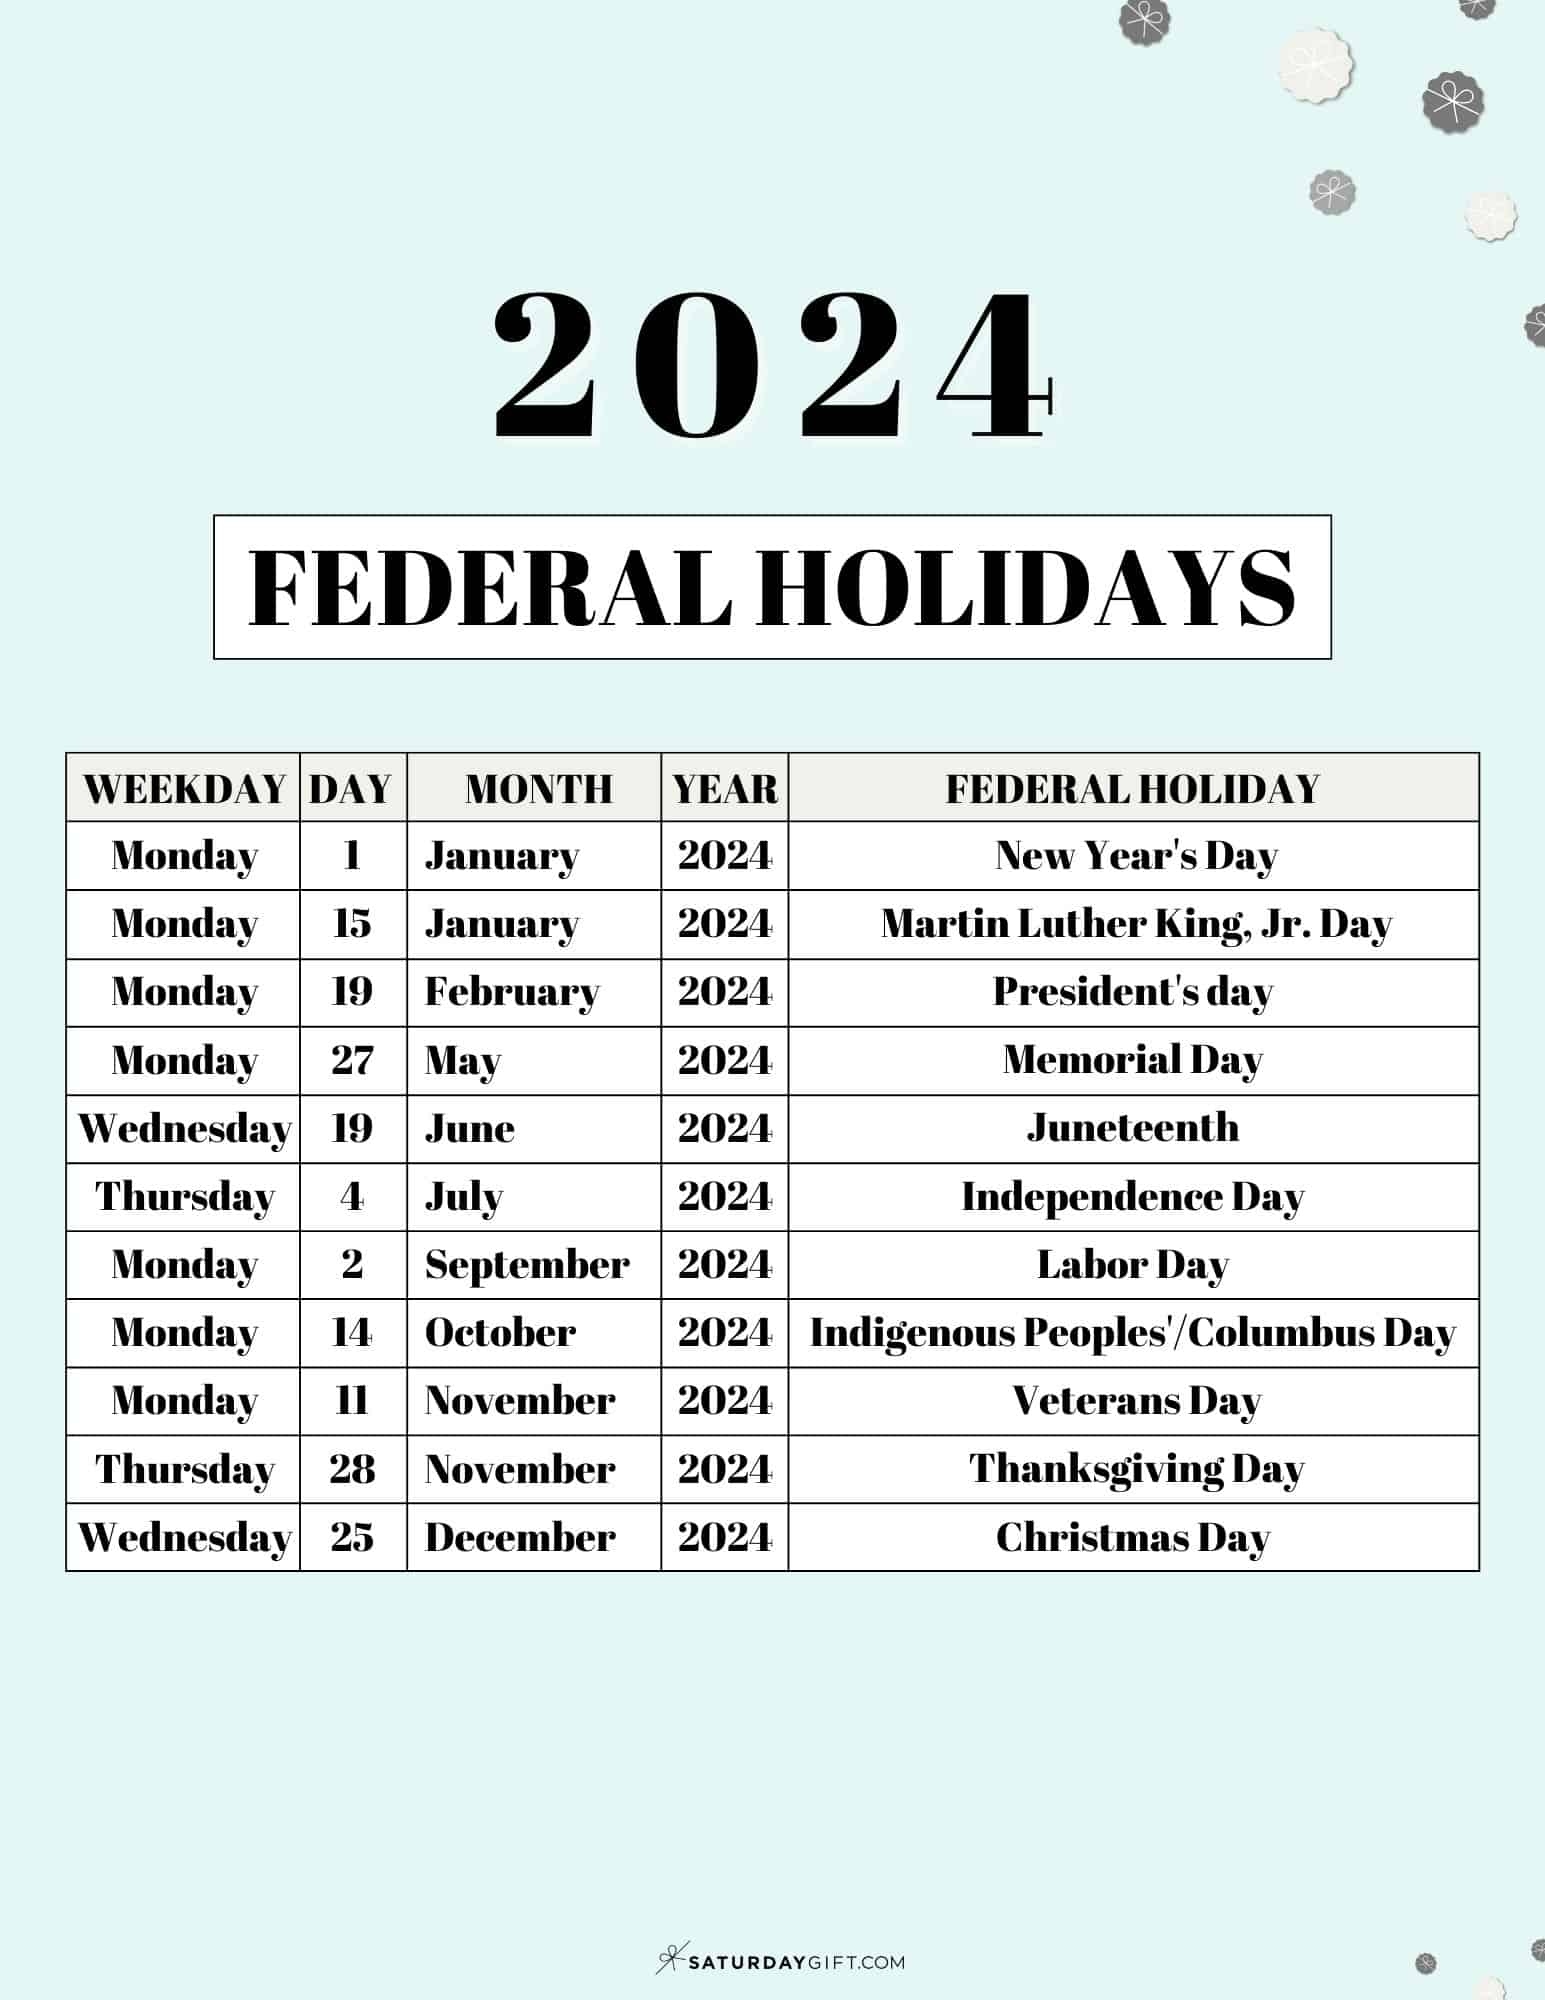 List Of 2024 Holiday Dates Carly Crissie - Free Printable 2024 Federal Holiday Calendar